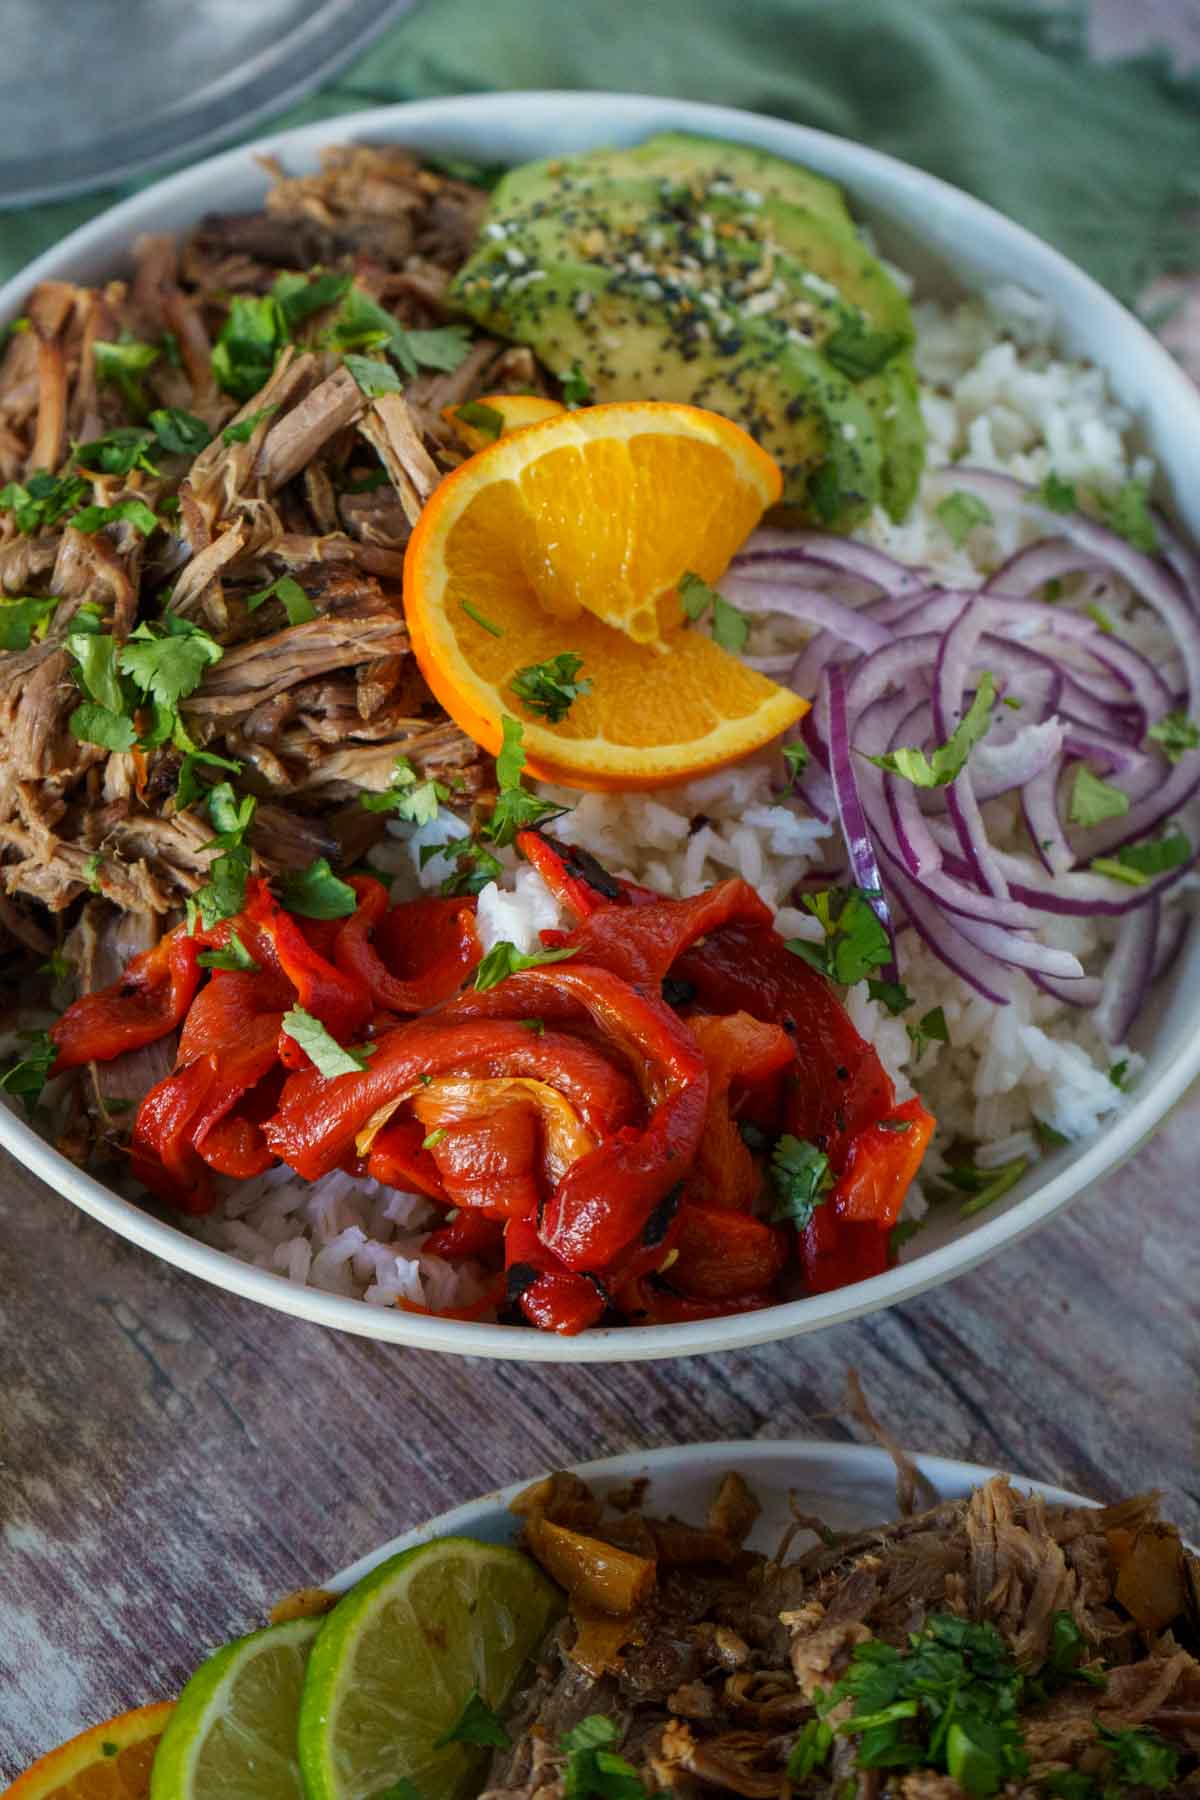 Shredded beef and veggies in a rice bowl.